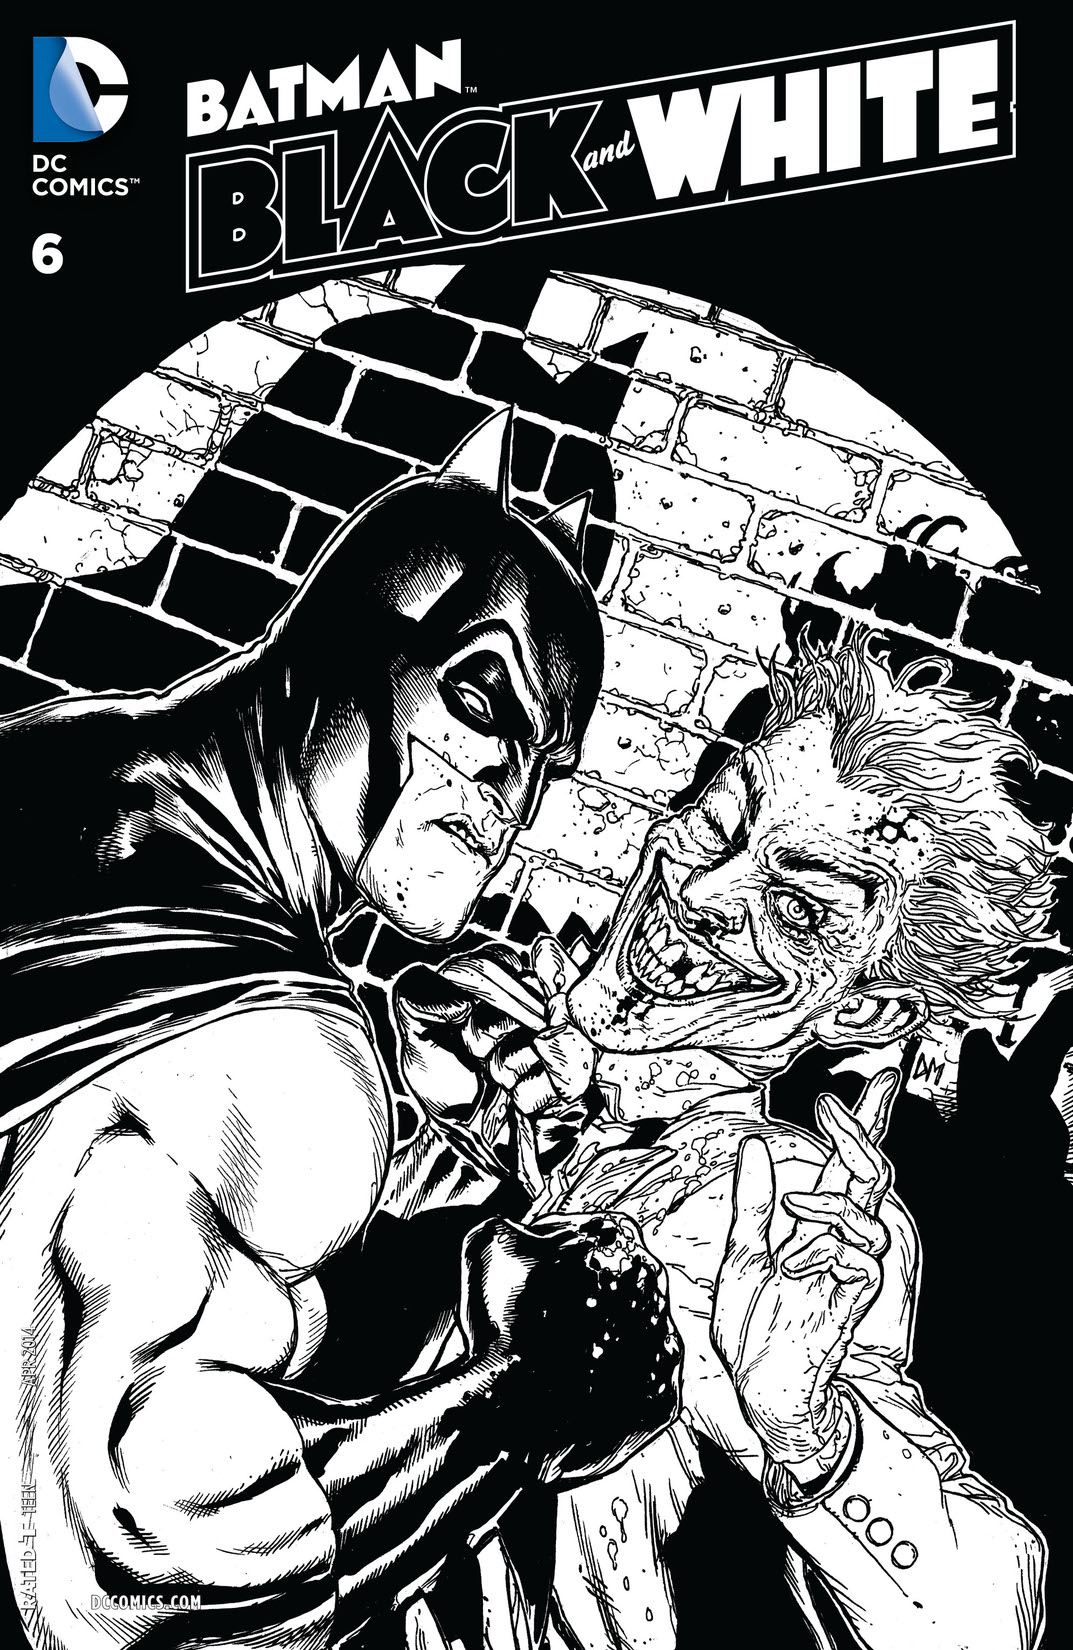 Batman Black and White (2013-) #6 preview images